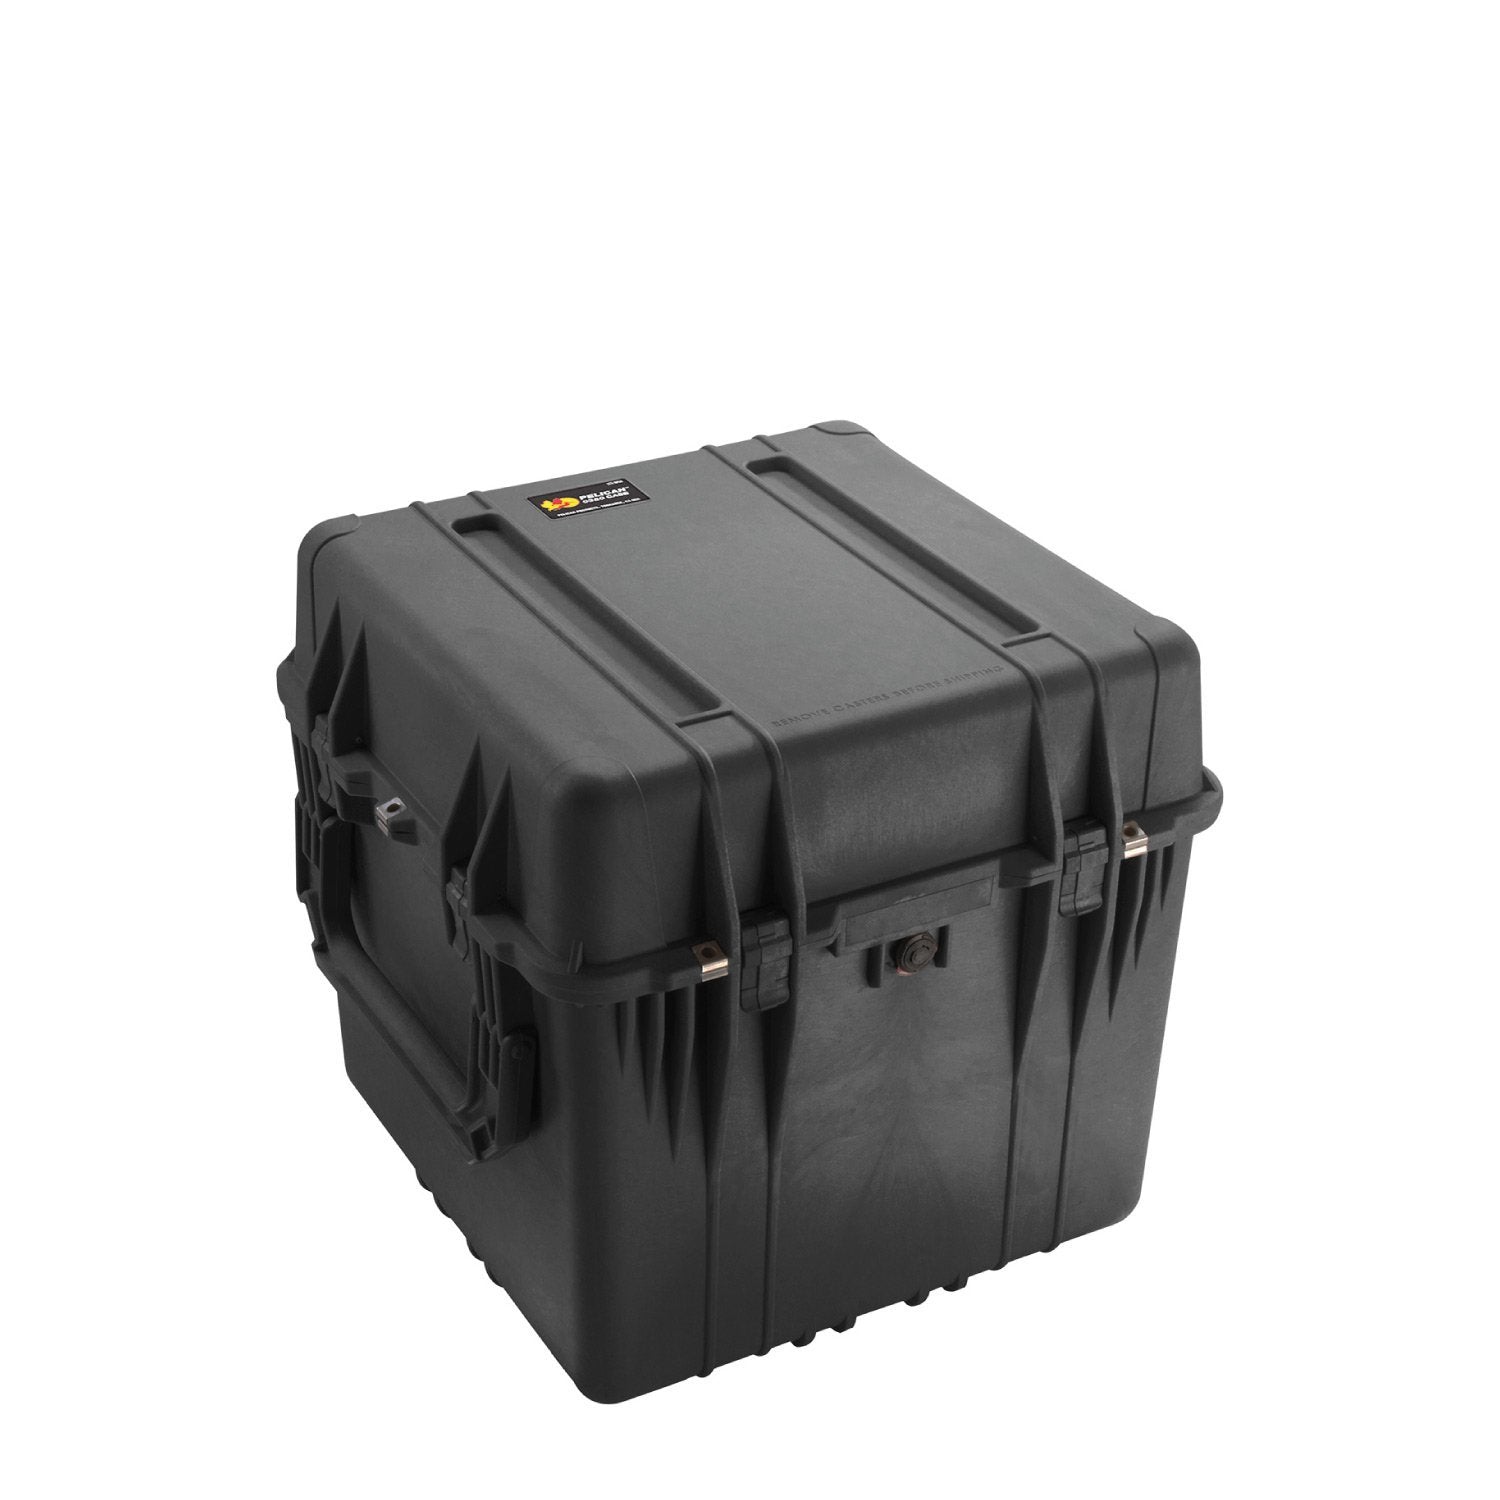 Pelican 0350 Protector Cube Case Black Bags, Packs and Cases Pelican Products With Foam Tactical Gear Supplier Tactical Distributors Australia